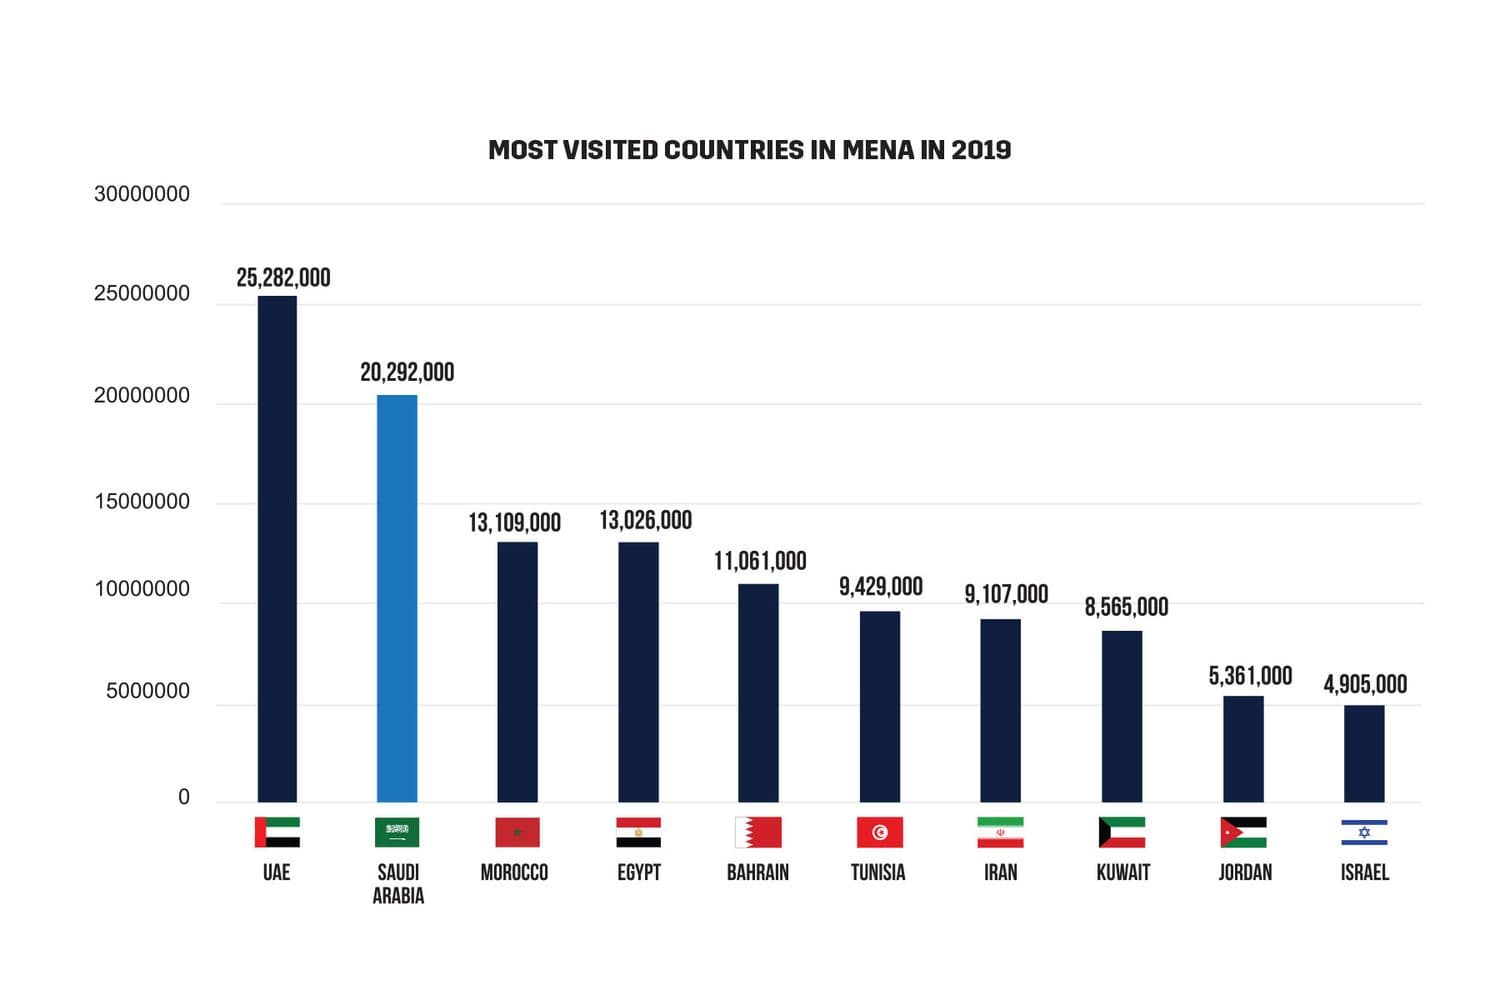 Most visited countries in MENA in 2019